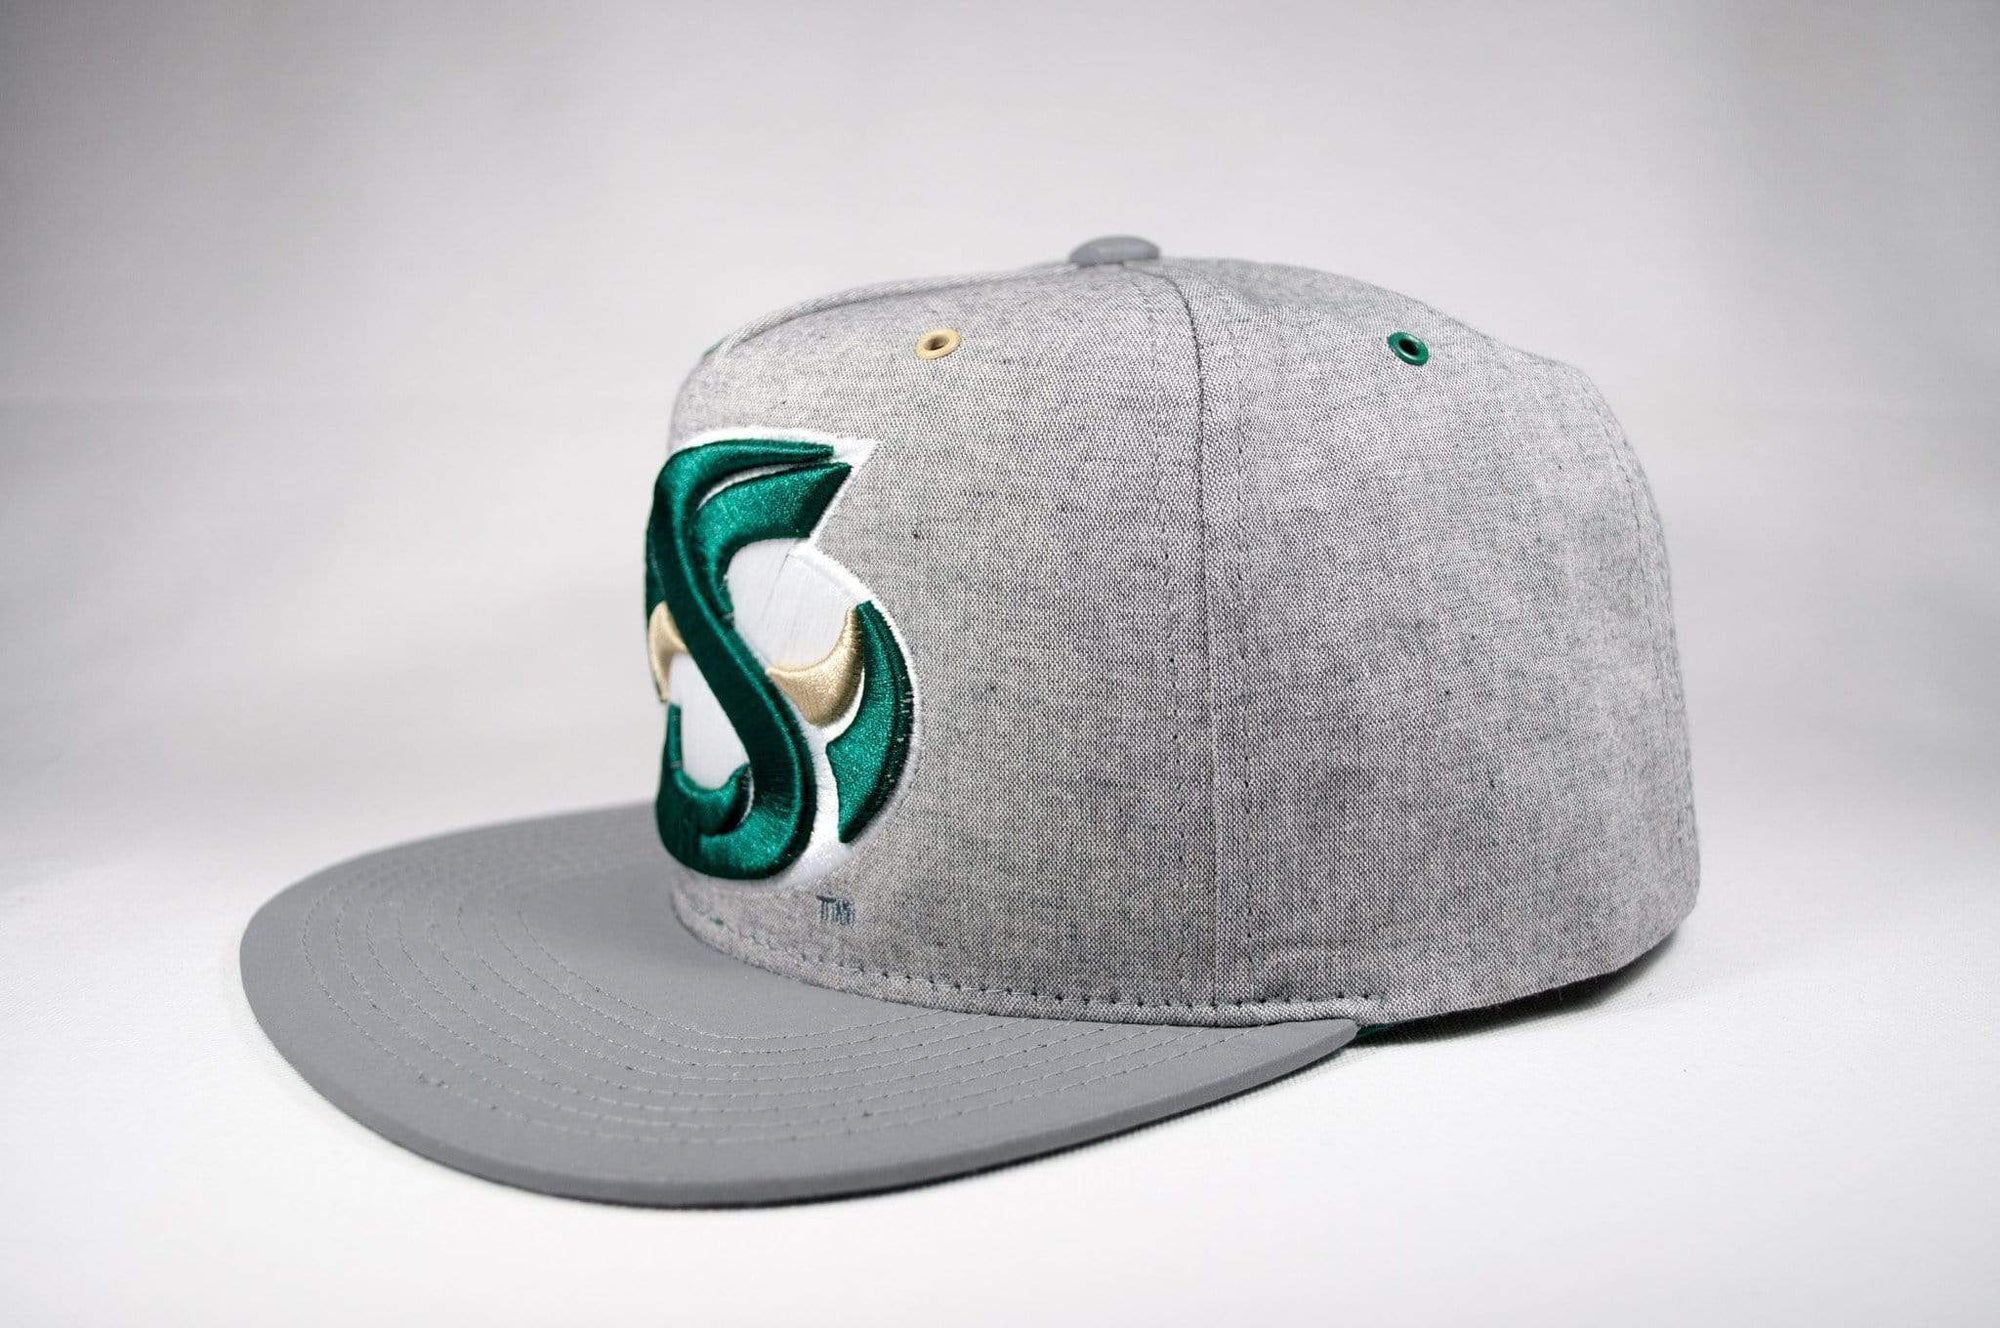 Sacramento State Hornets Sac State Grey Matter 3M™ Sac State Snapback [Limited Edition] Cap Hat by Zeus Collegiate